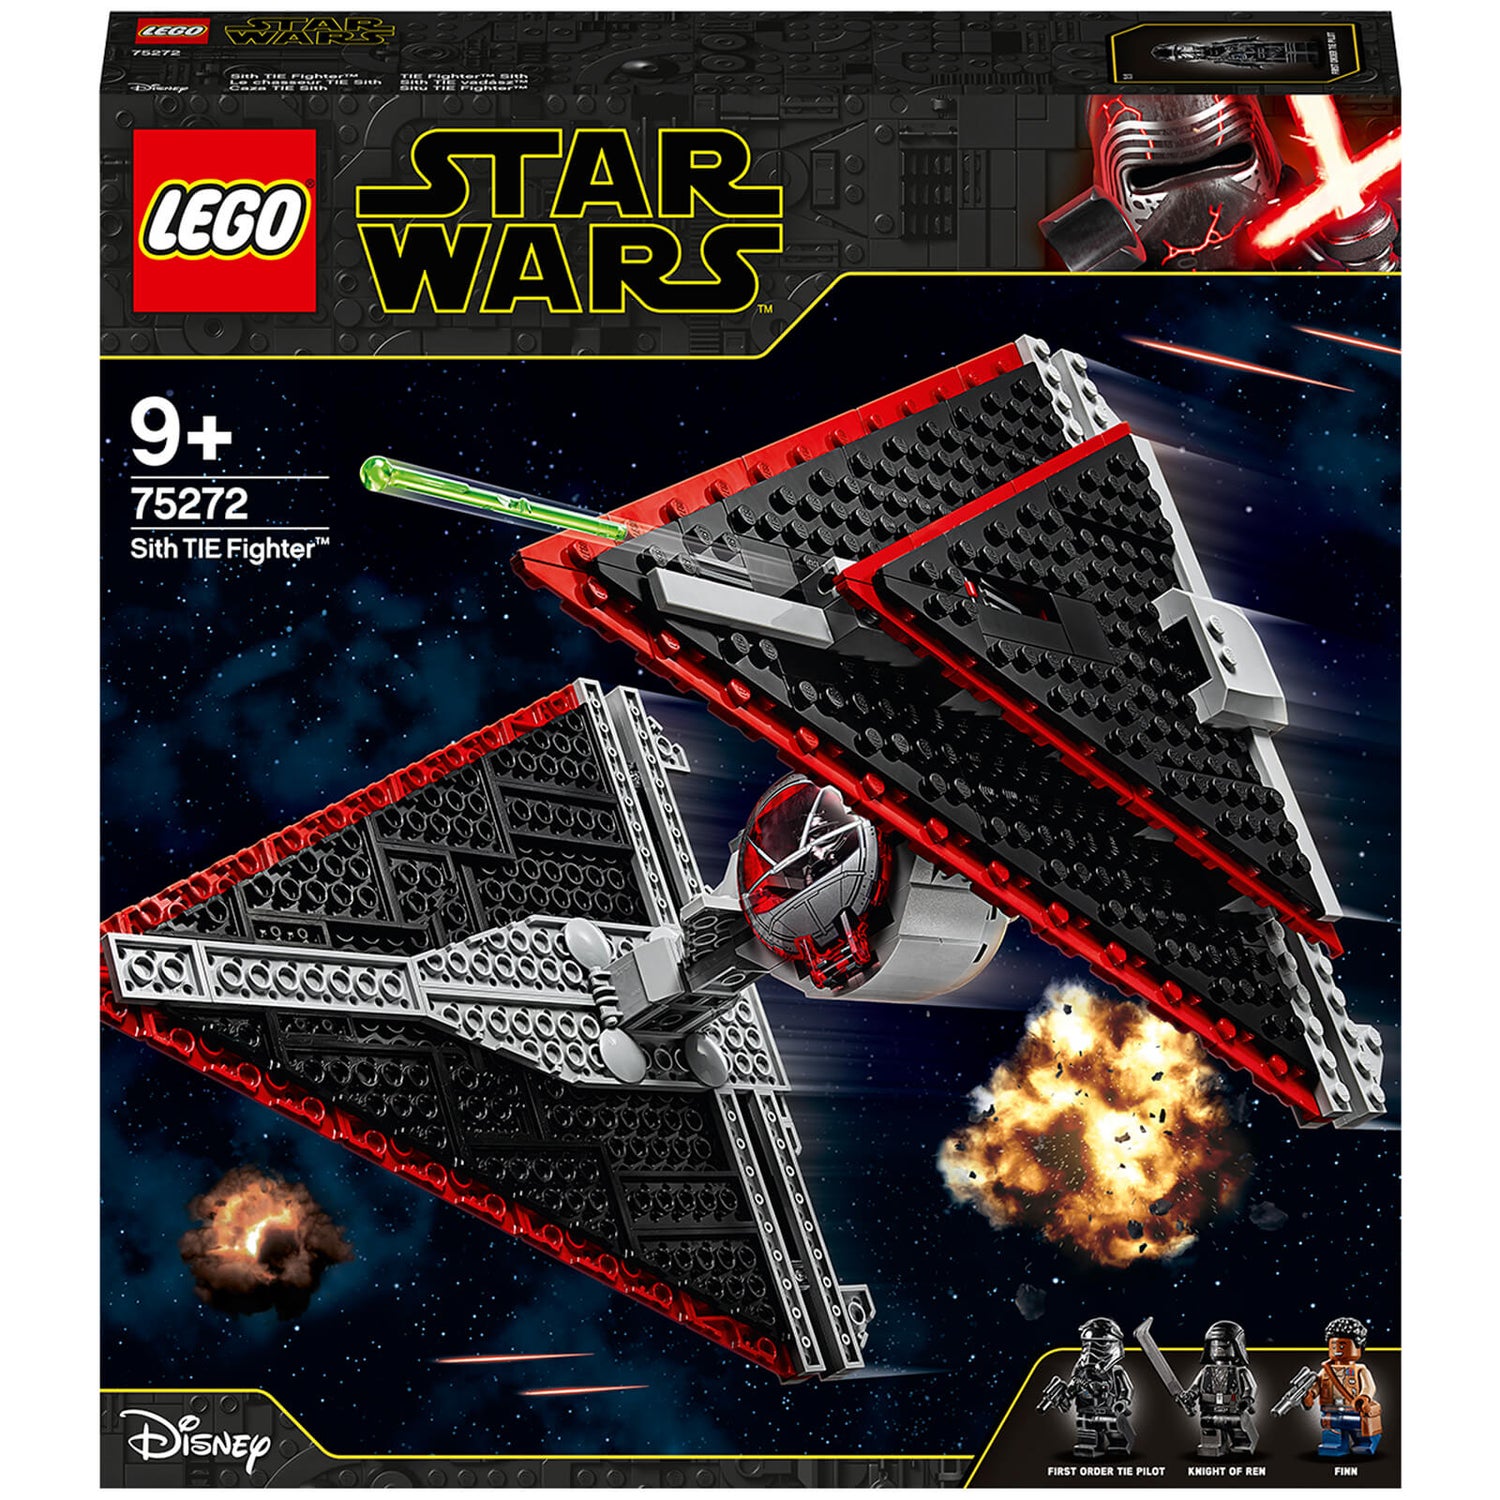 Display stand for LEGO® Star Wars™ First Order Special Forces TIE